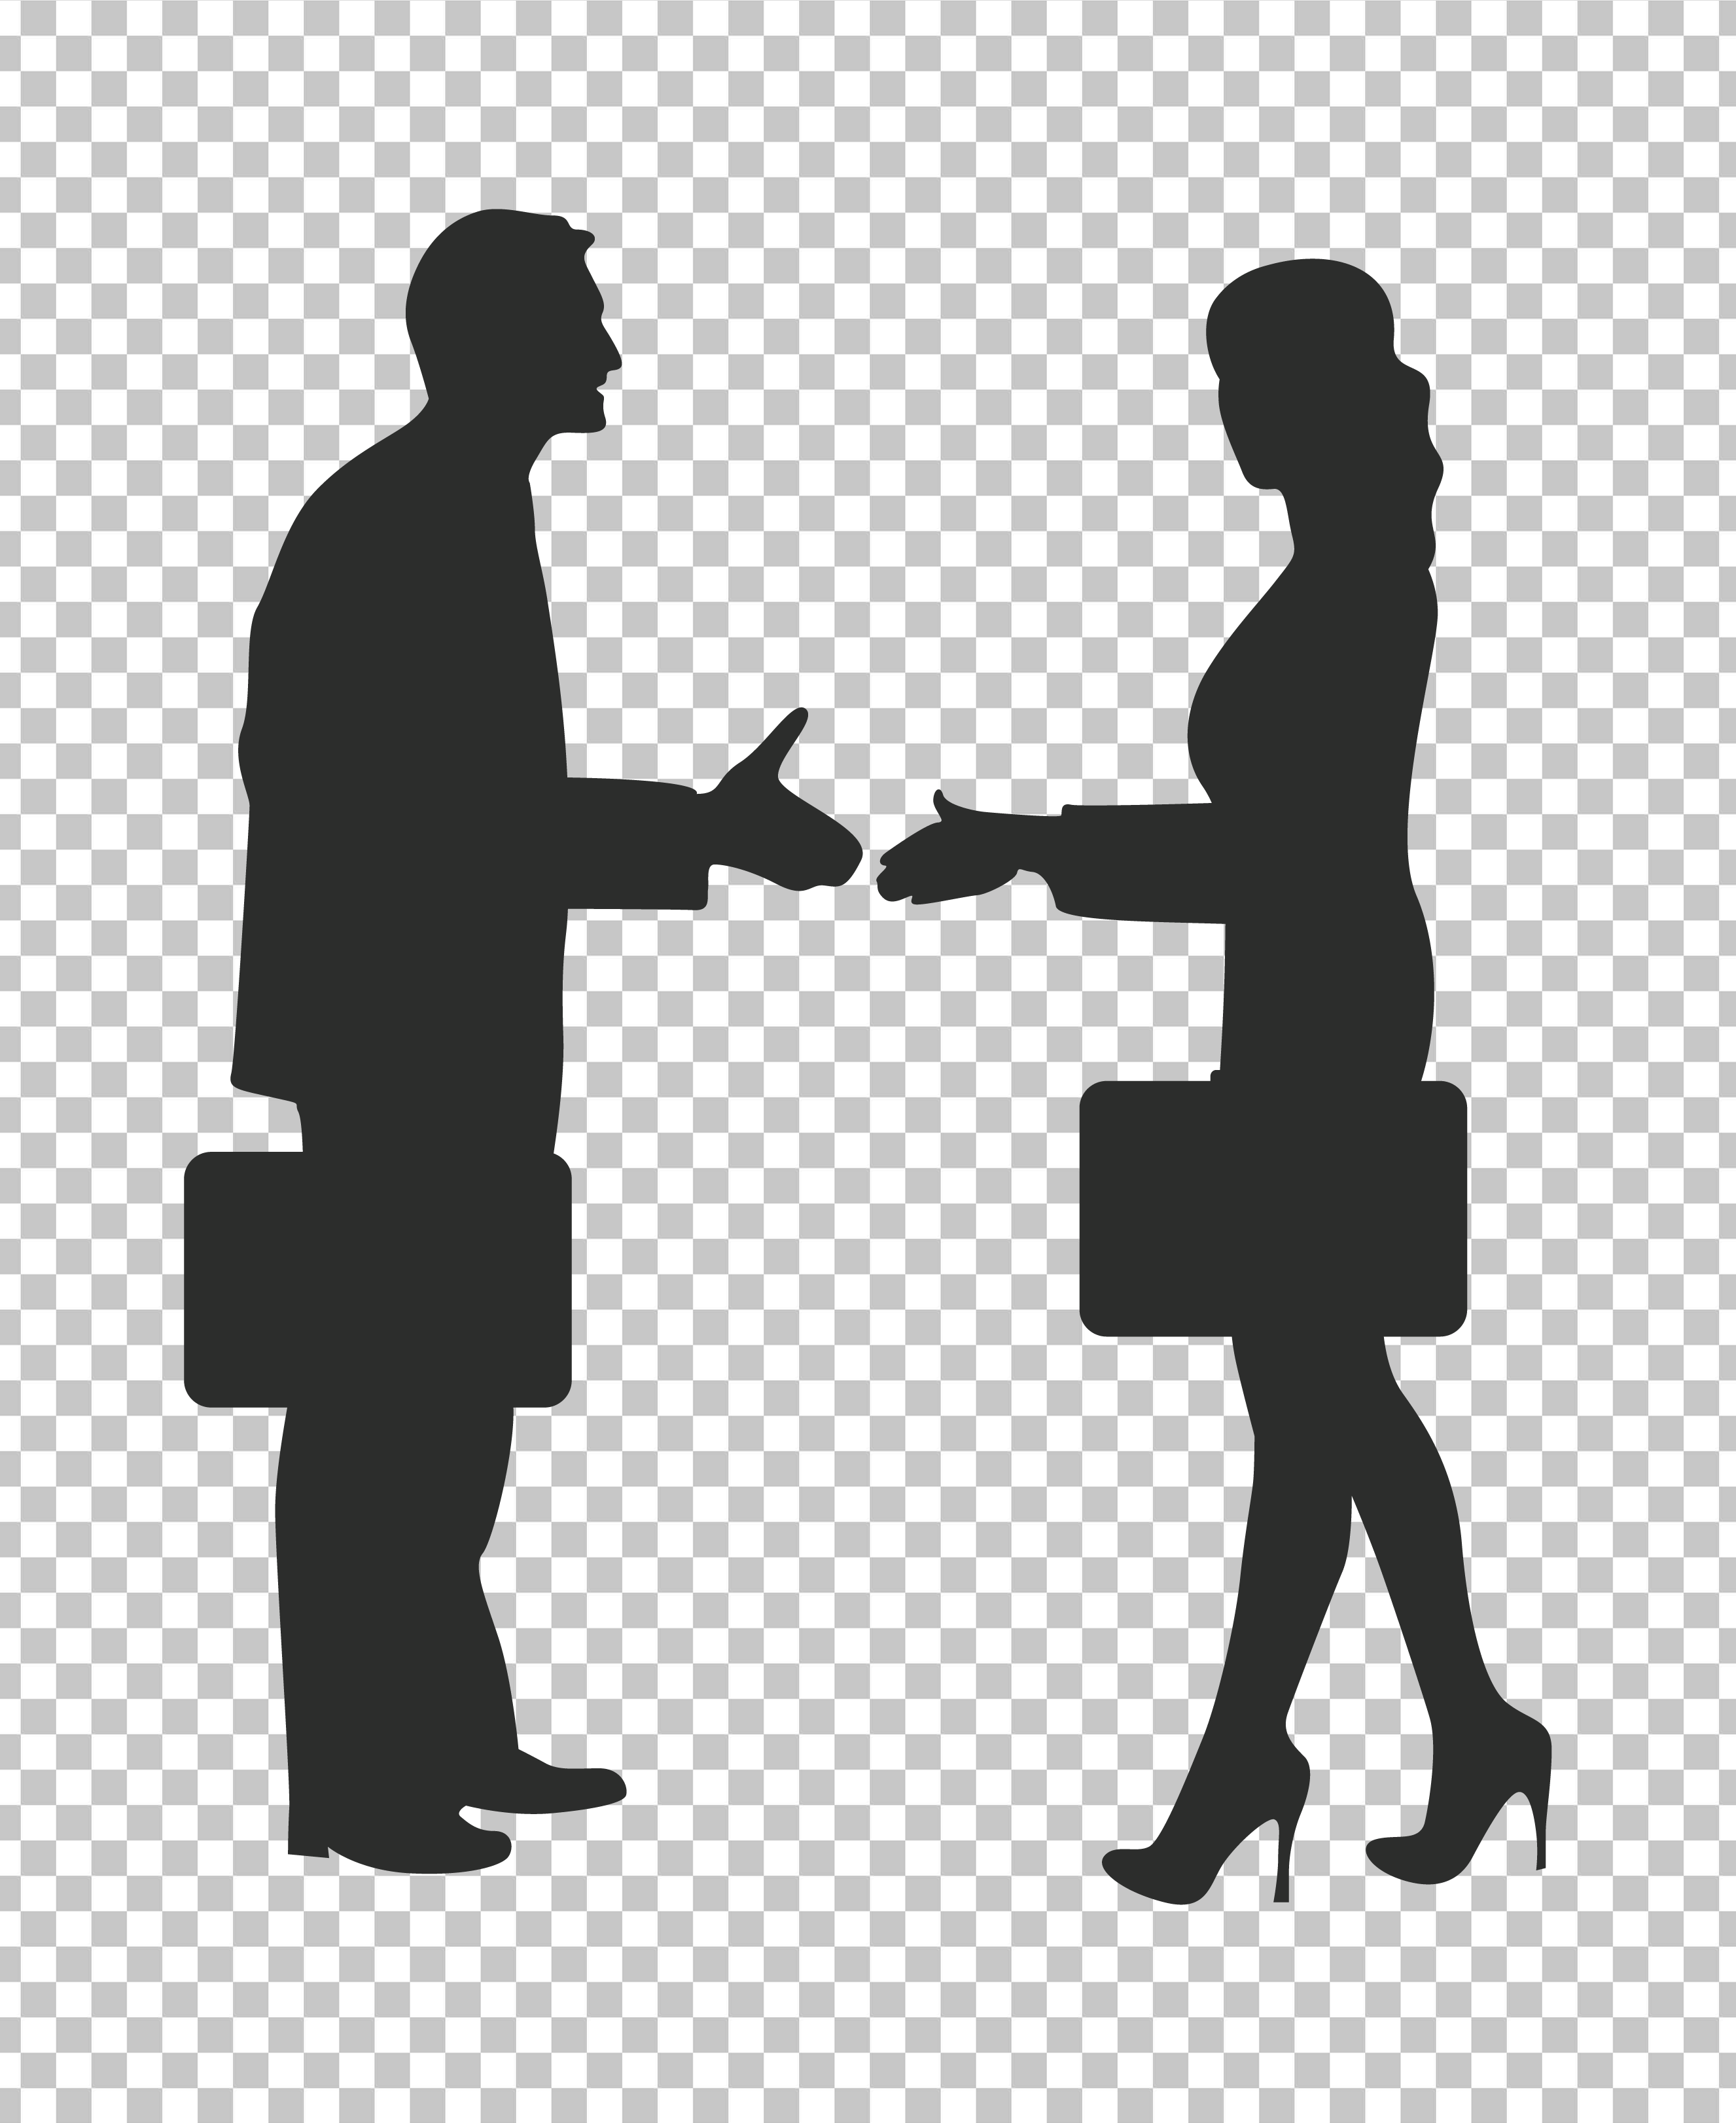 Business Deal Man and Woman Shaking Hands Silhouette PNG Image